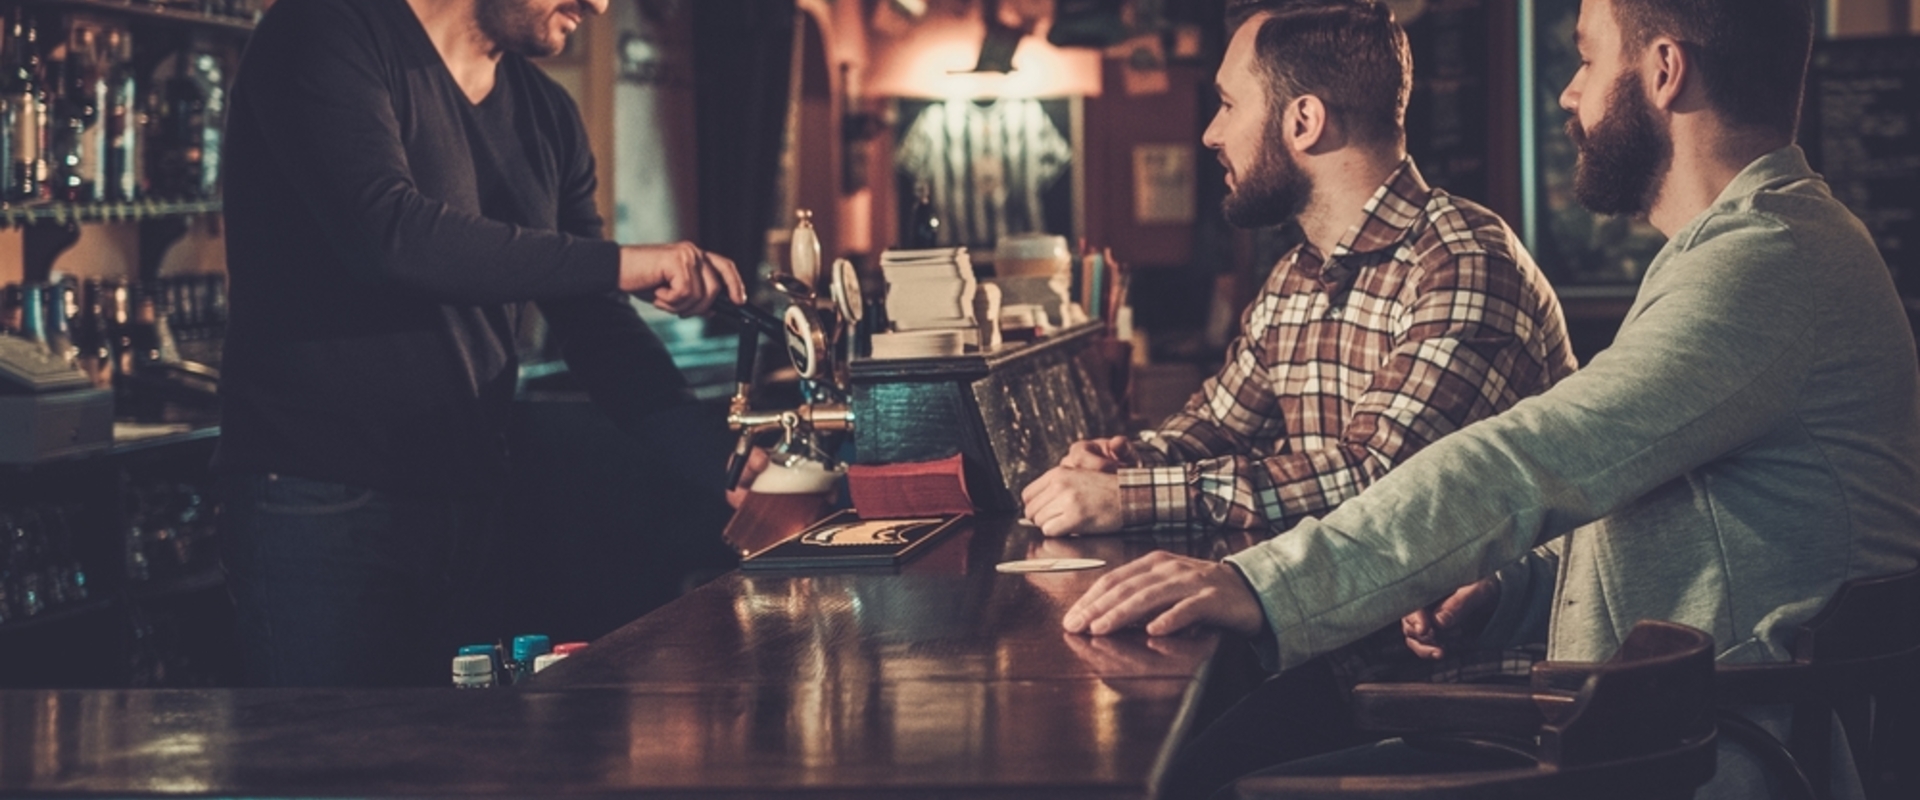 8 ways pub technology can really help cut costs and boost the bottom line